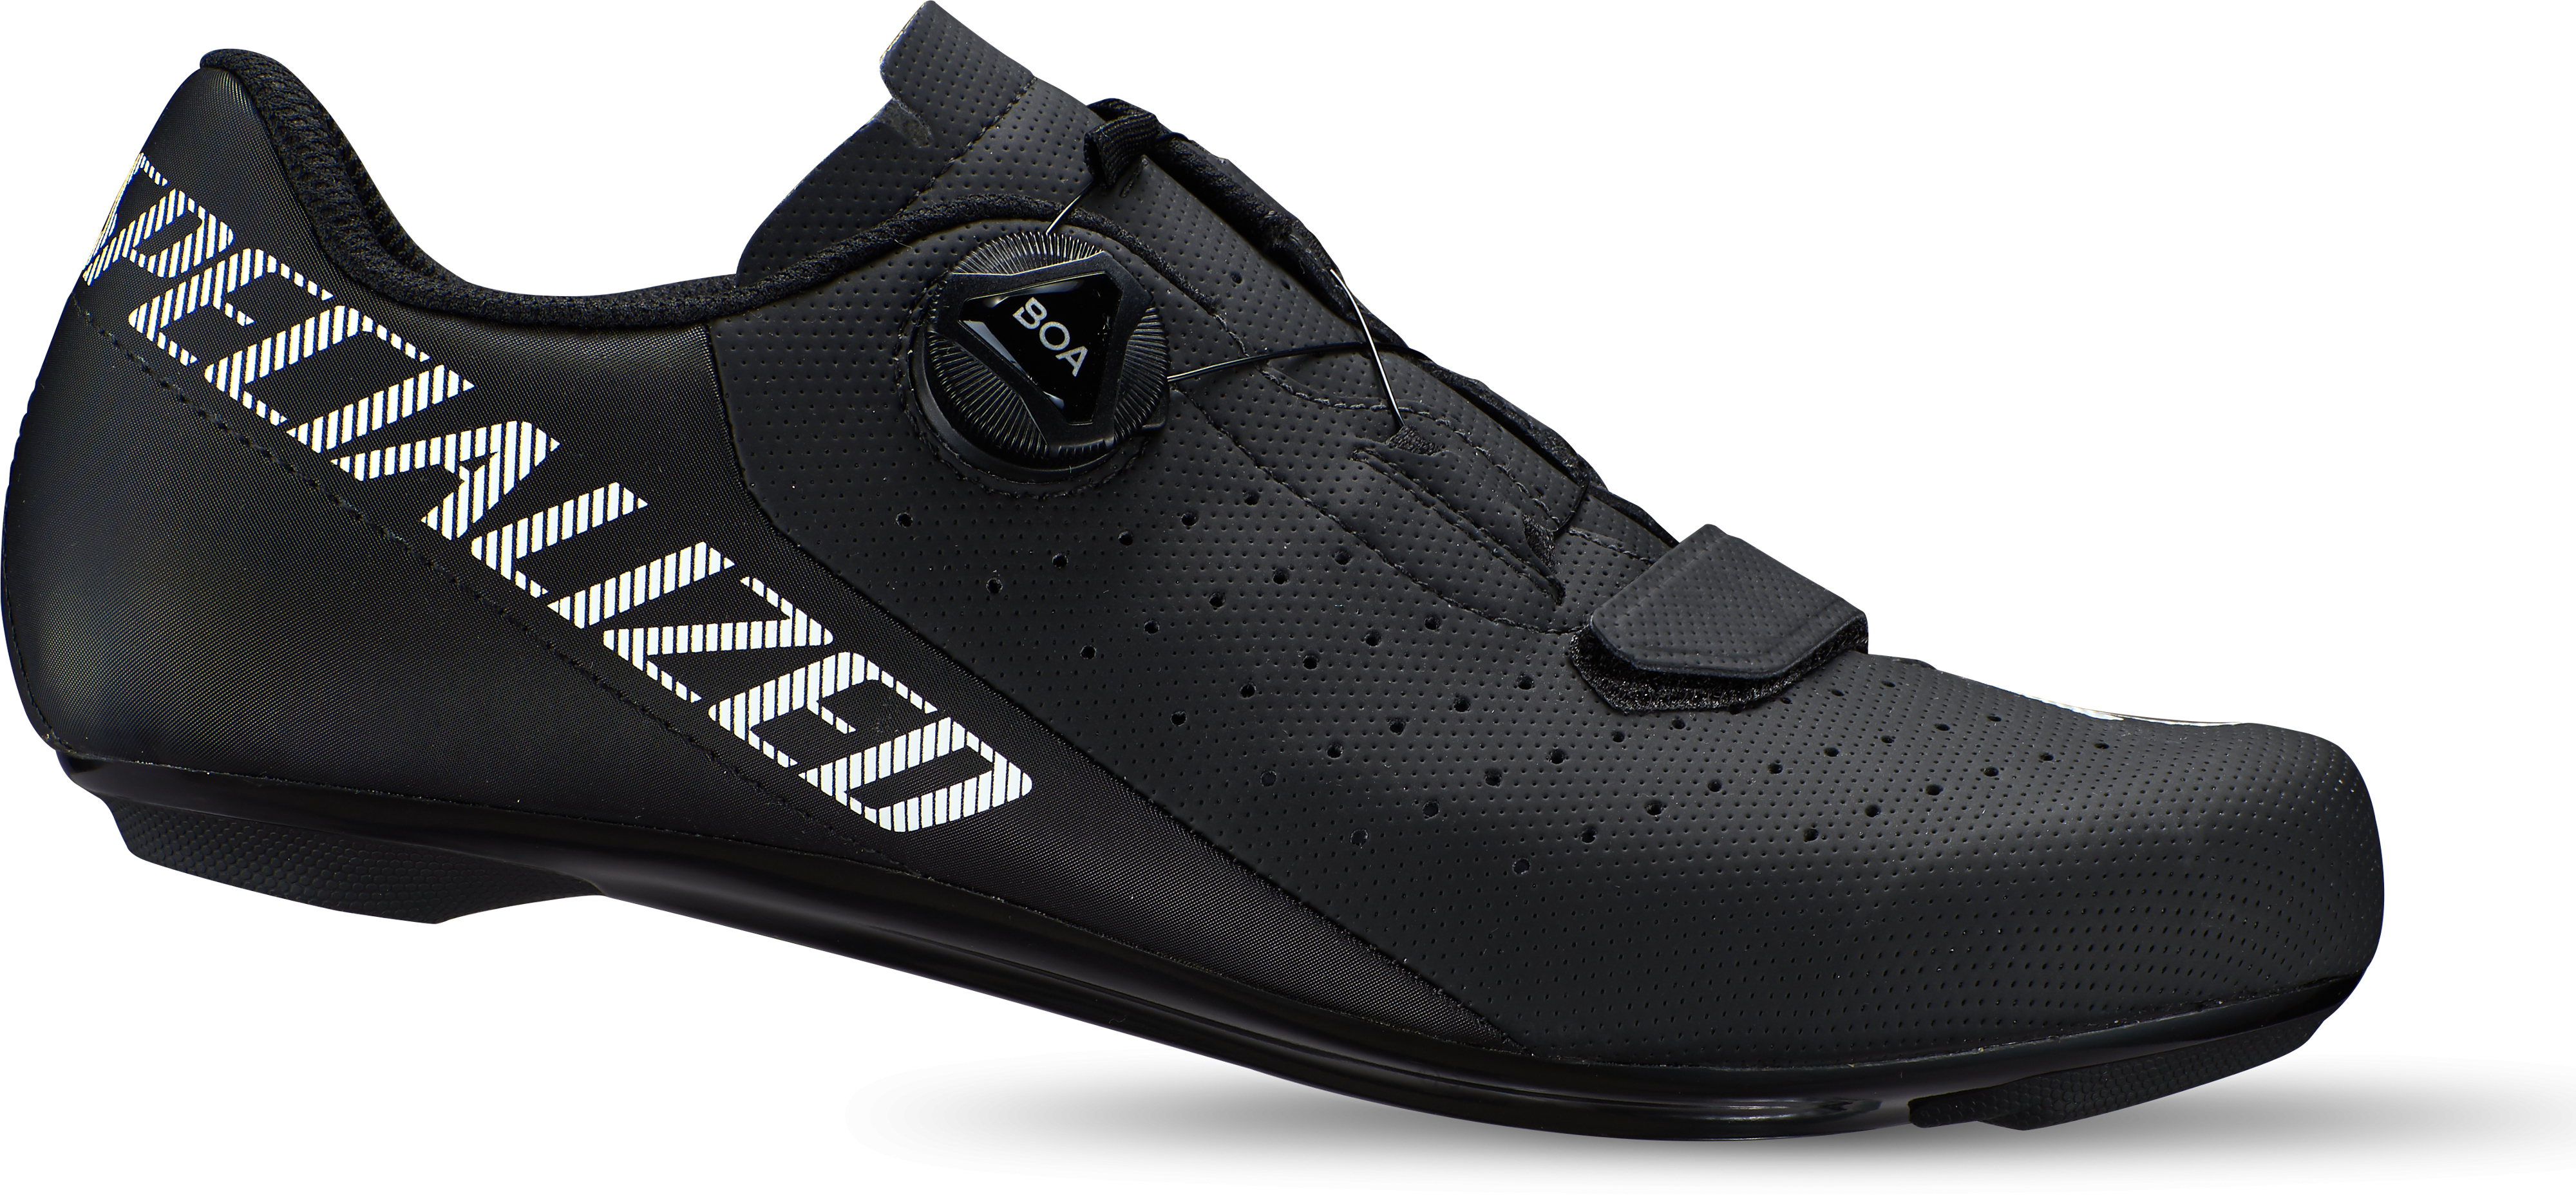 Specialized  Torch 1.0 Road Cycling Shoes  37 Black